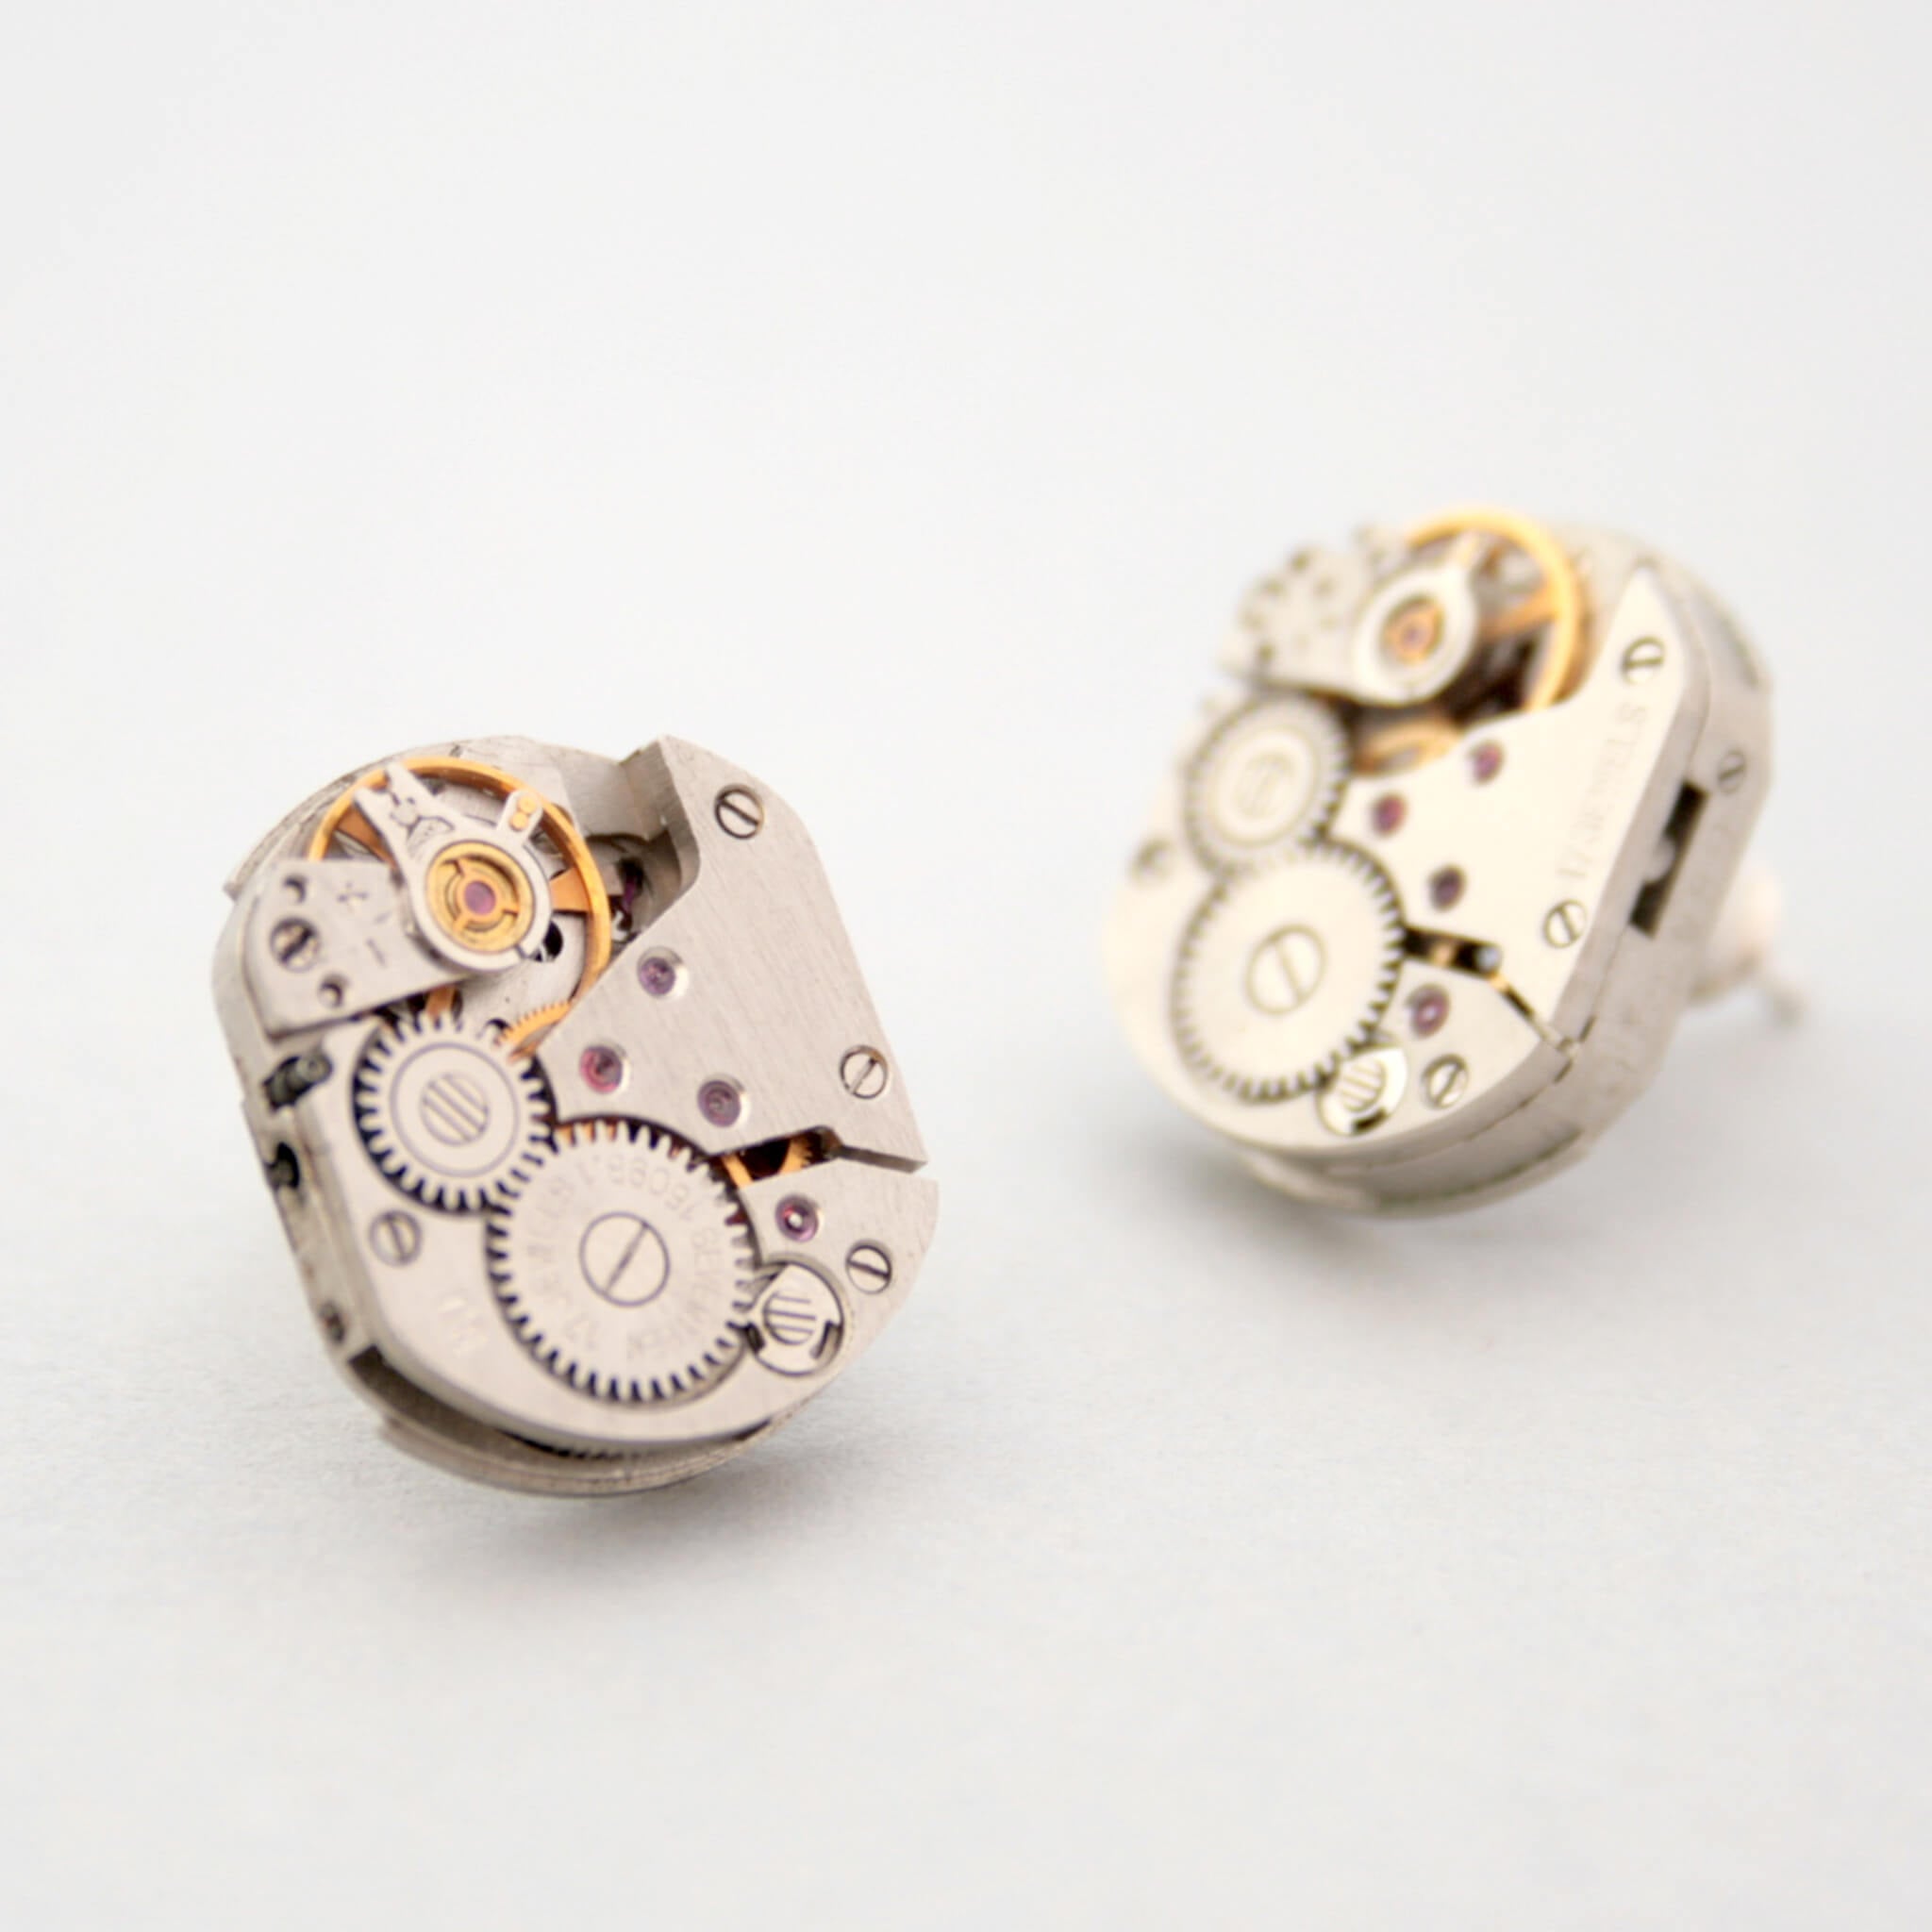 watch movements turned into stud earrings lying on a white paper